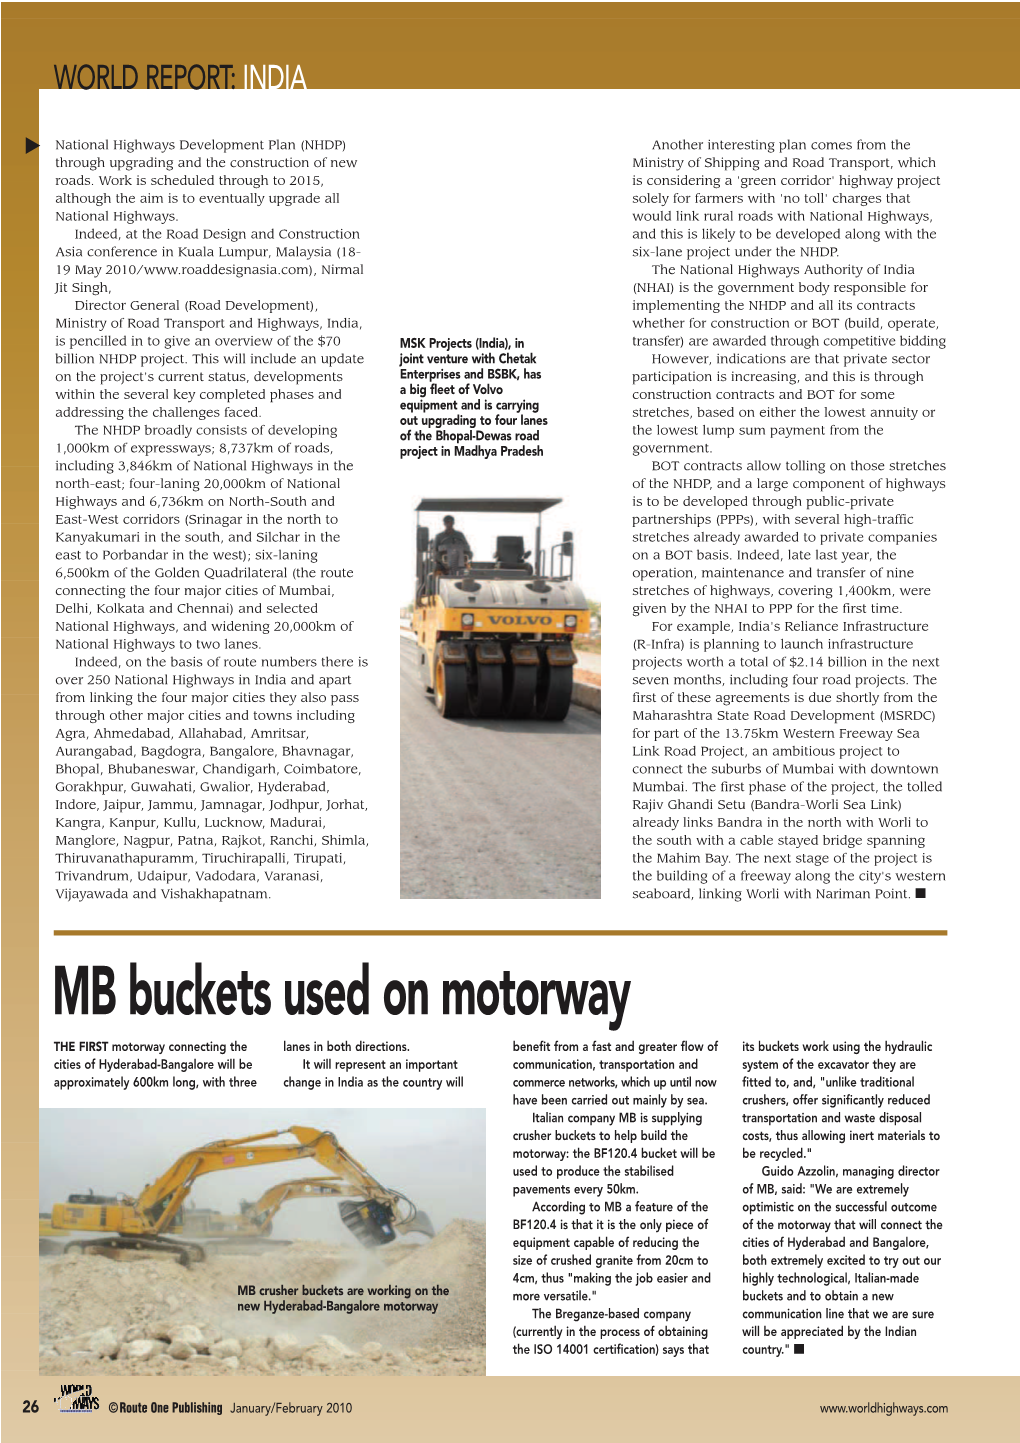 MB Buckets Used on Motorway the FIRST Motorway Connecting the Lanes in Both Directions